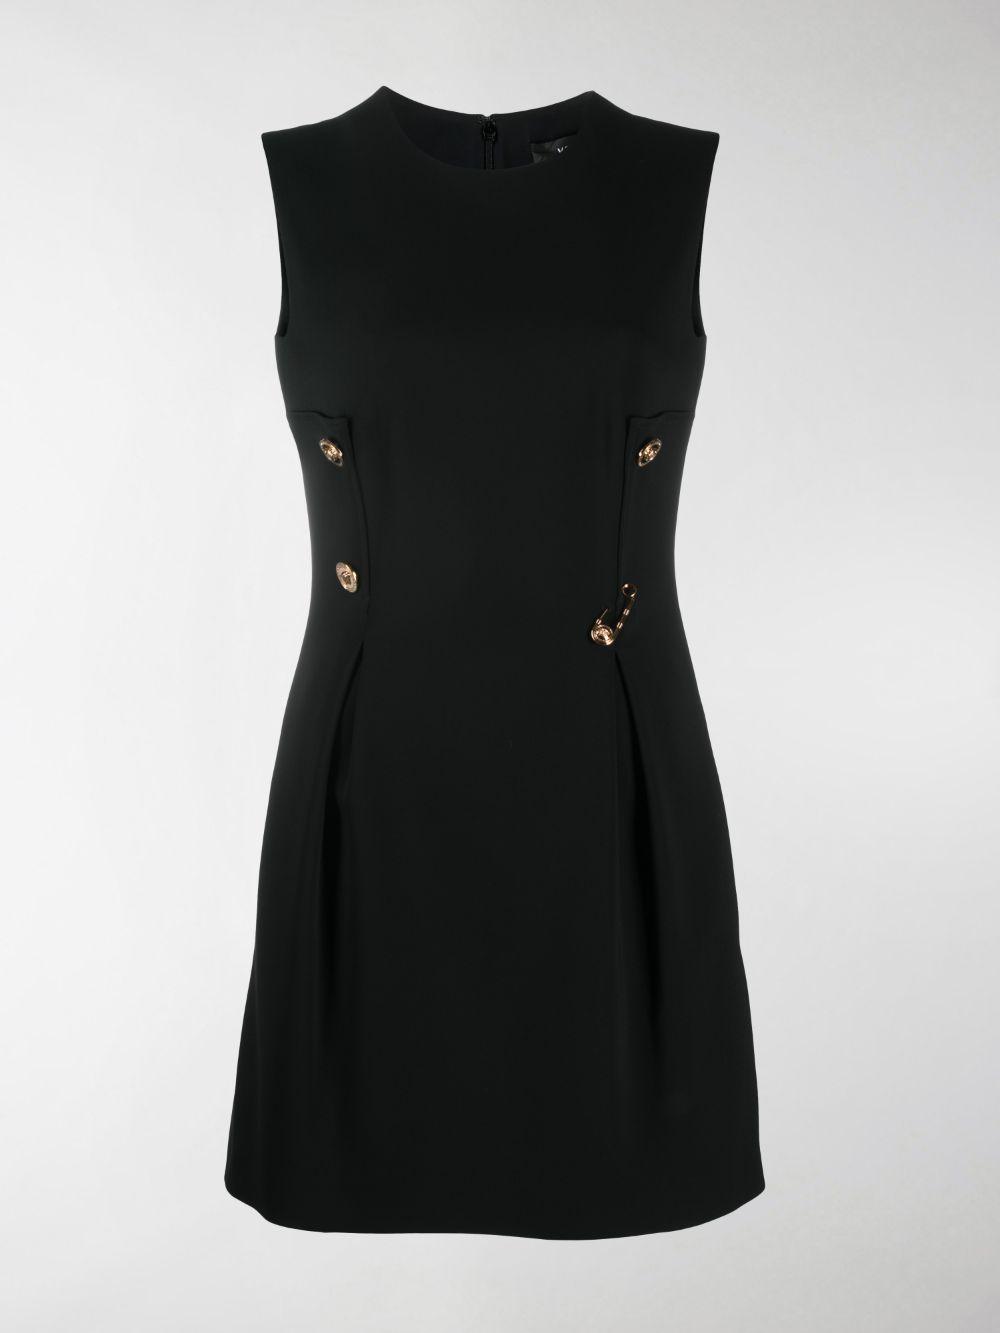 Versace Safety Pin Detail Mini Dress in Black - Lyst